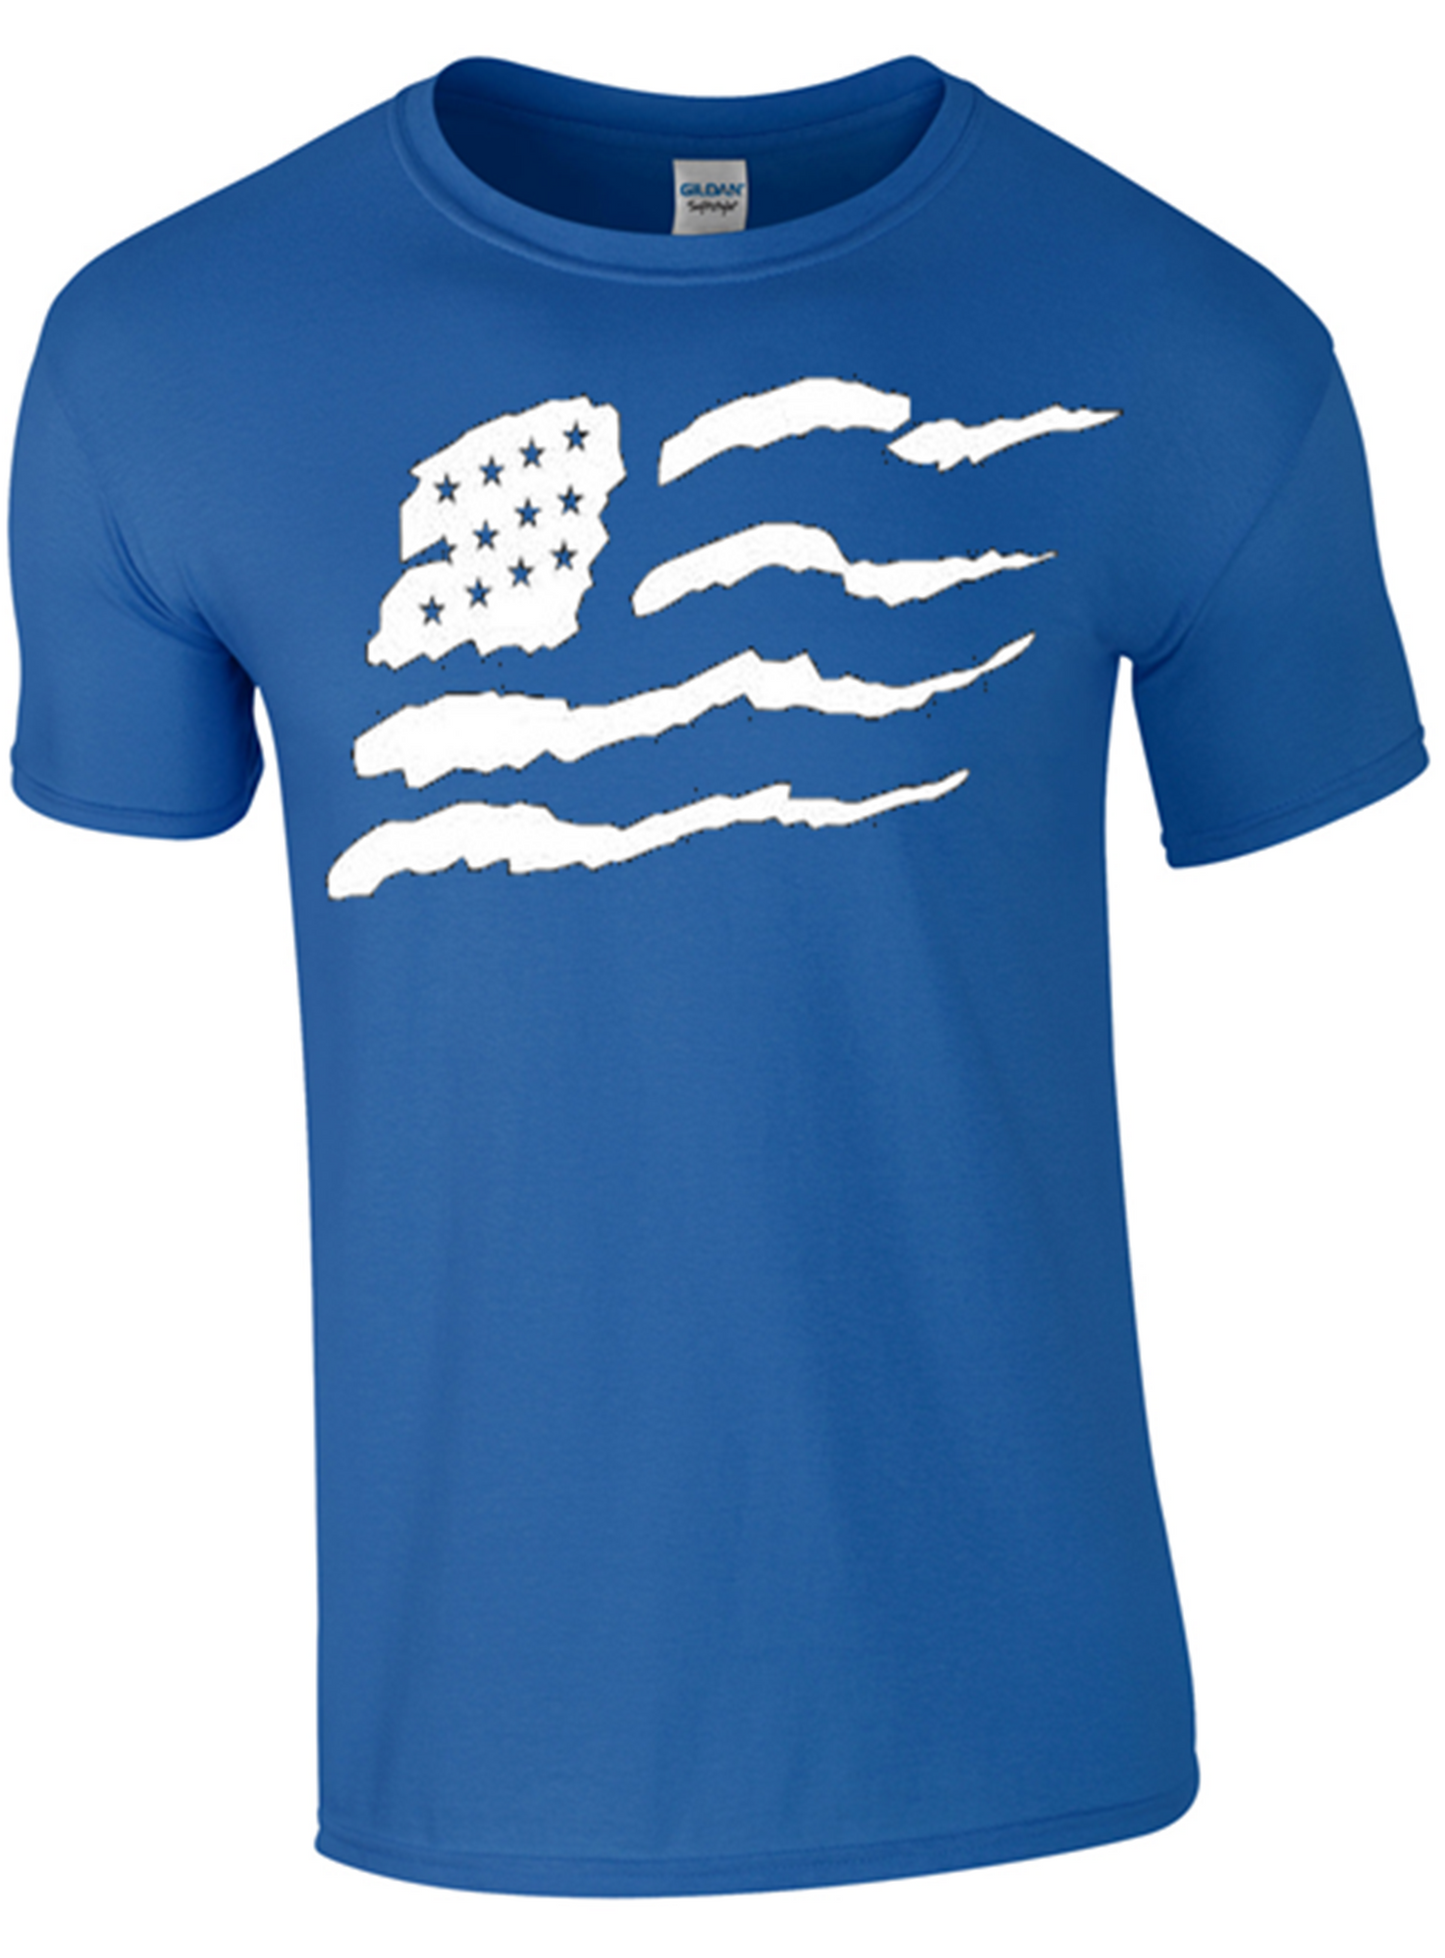 Stars & Stripes T-Shirt Printed DTG (Direct to Garment) for a Permanent Finish. - Army 1157 kit S / Royal Blue Army 1157 Kit Veterans Owned Business